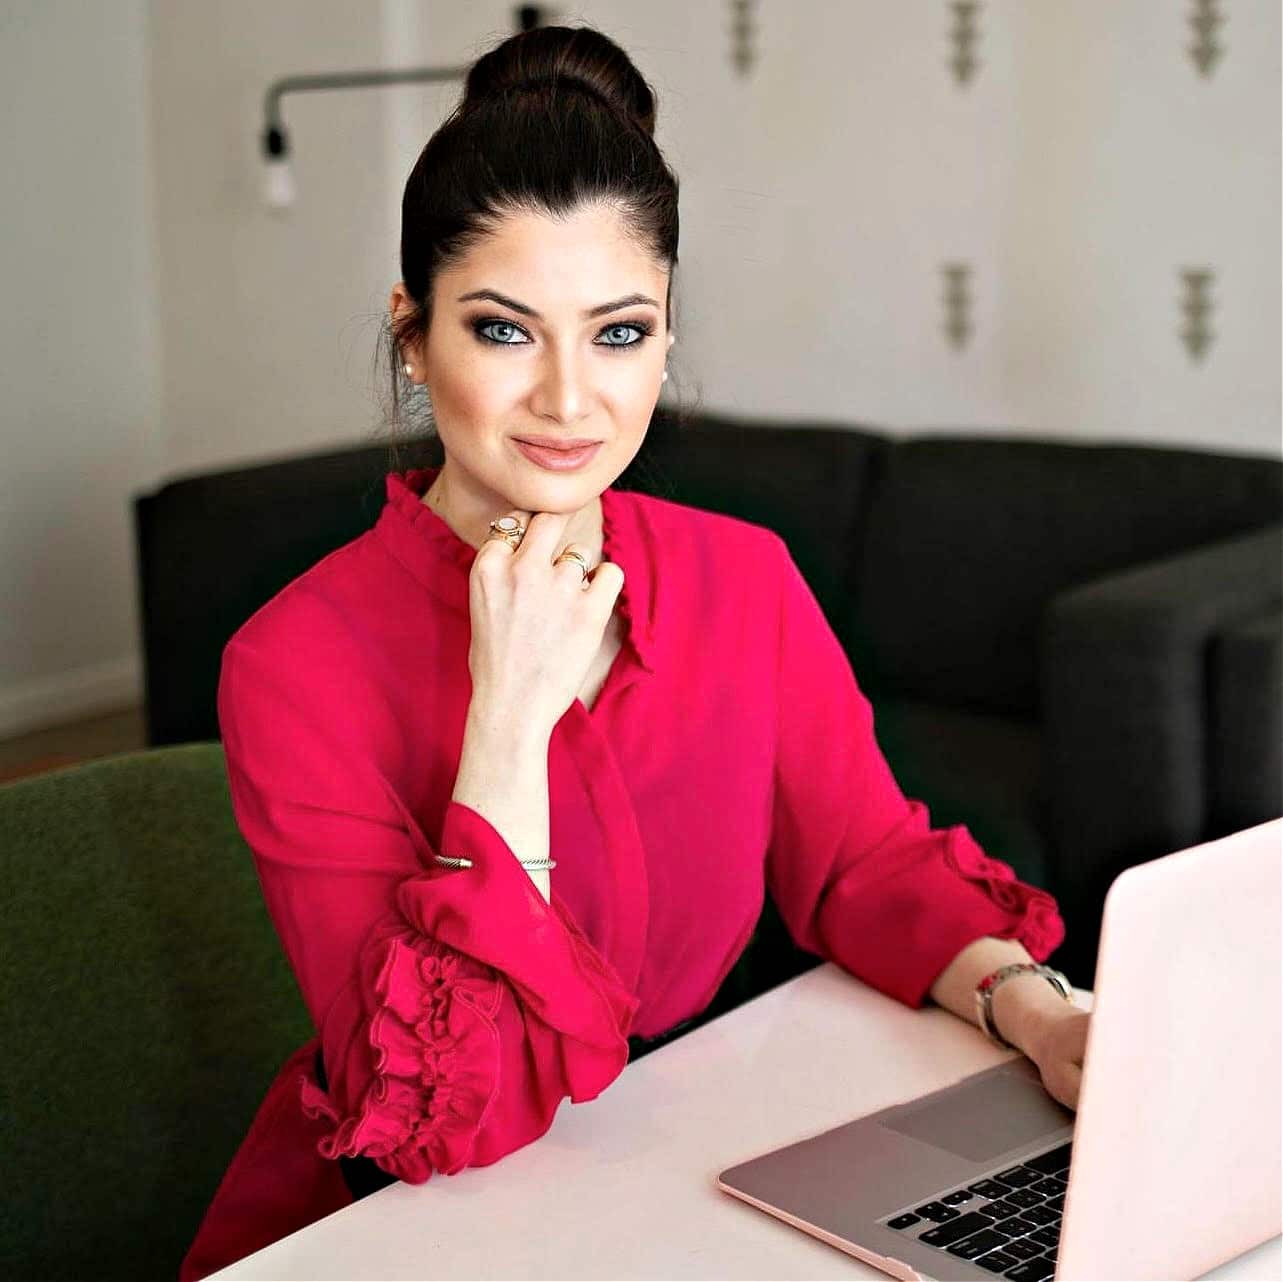 Dr. Yalda Safai sitting at her desk with computer